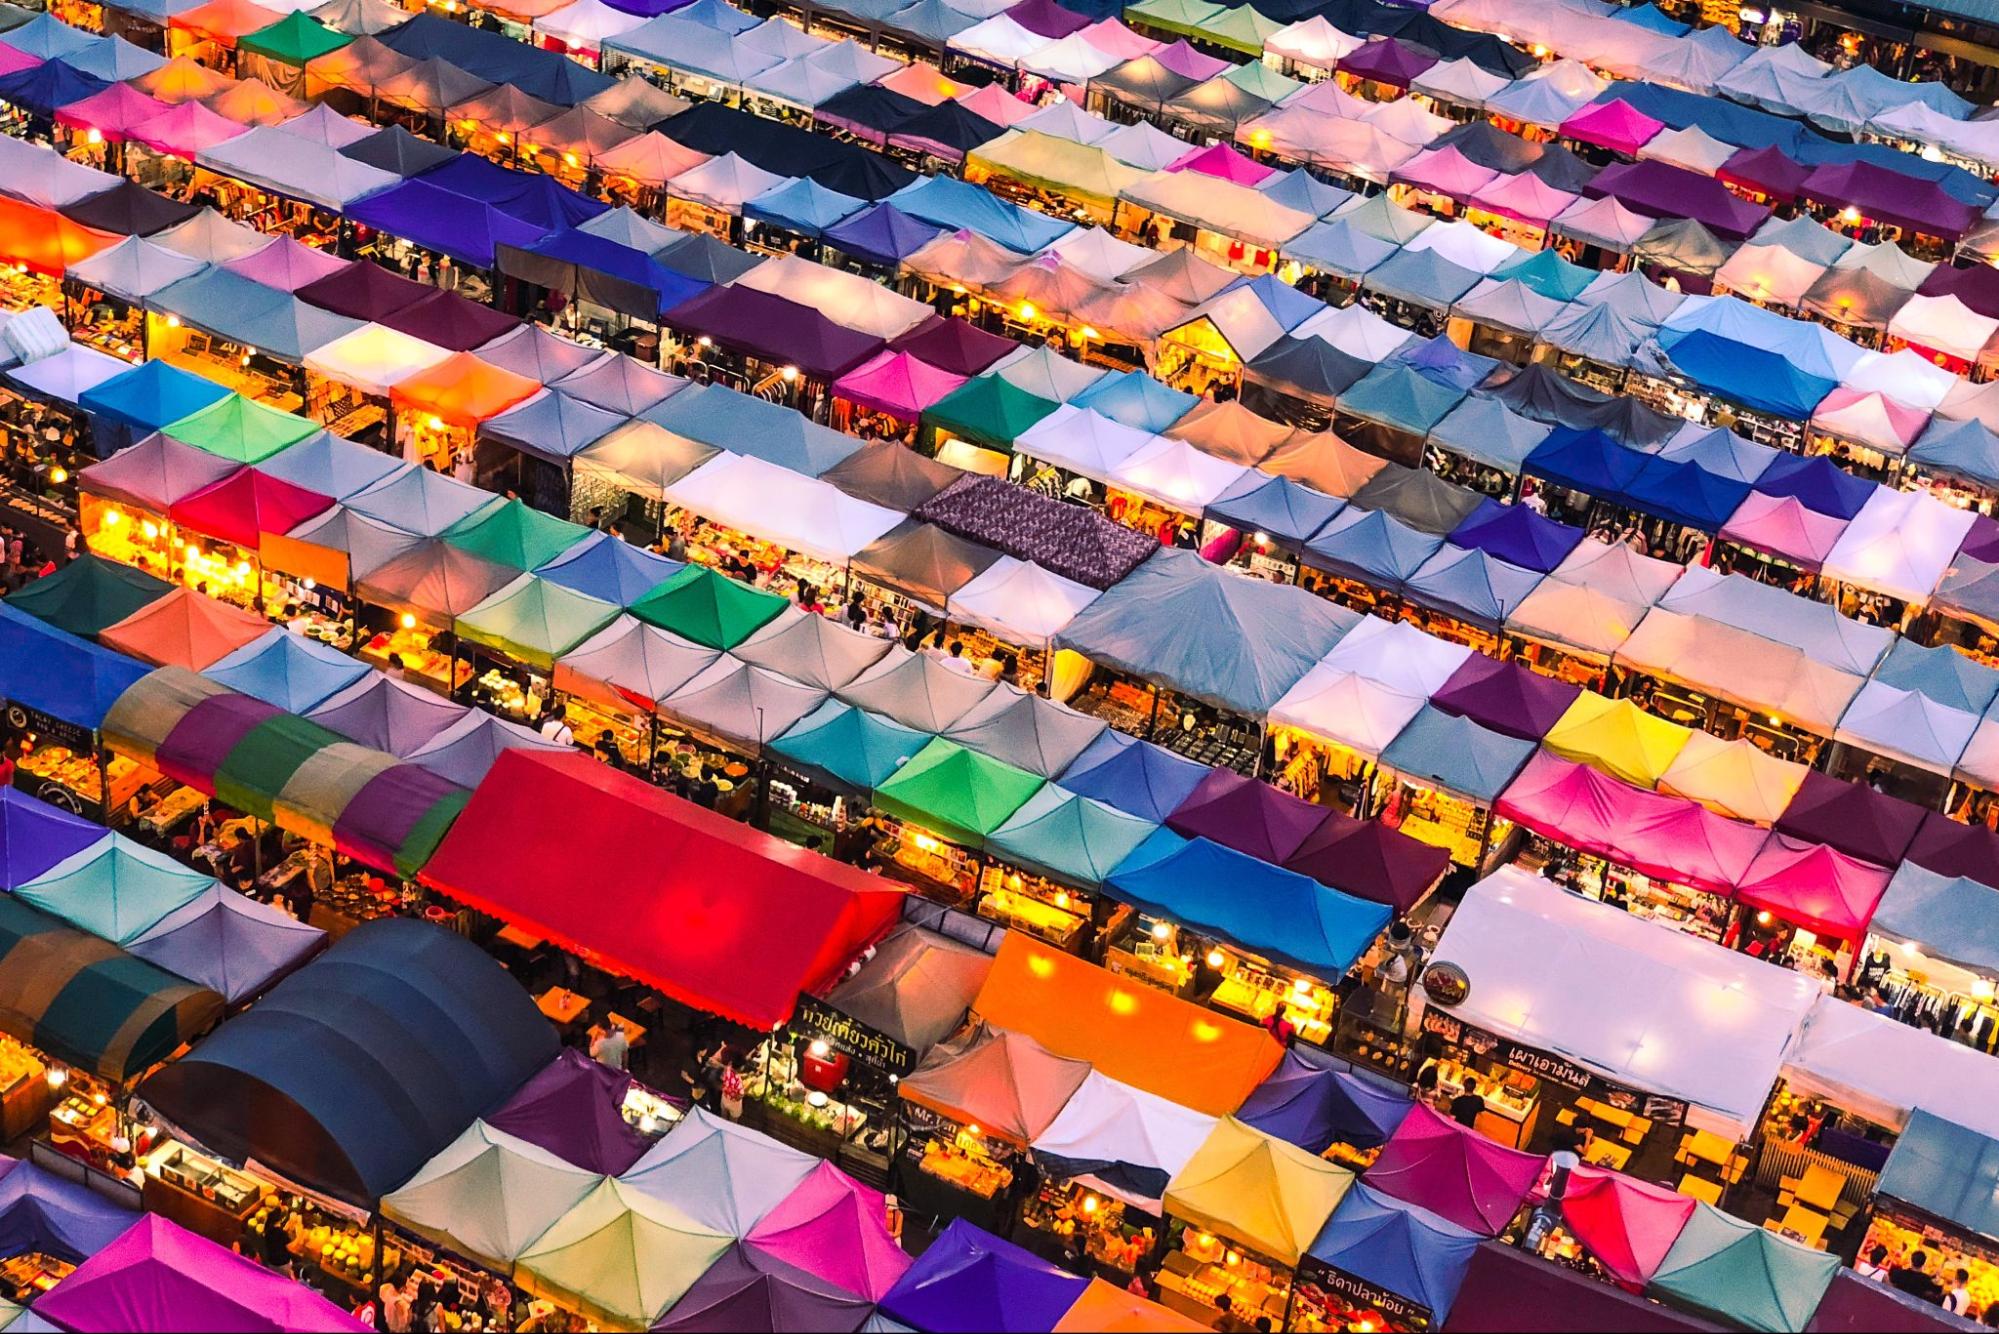 Aerial view of colorful market stalls selling variety of wares in Thailand